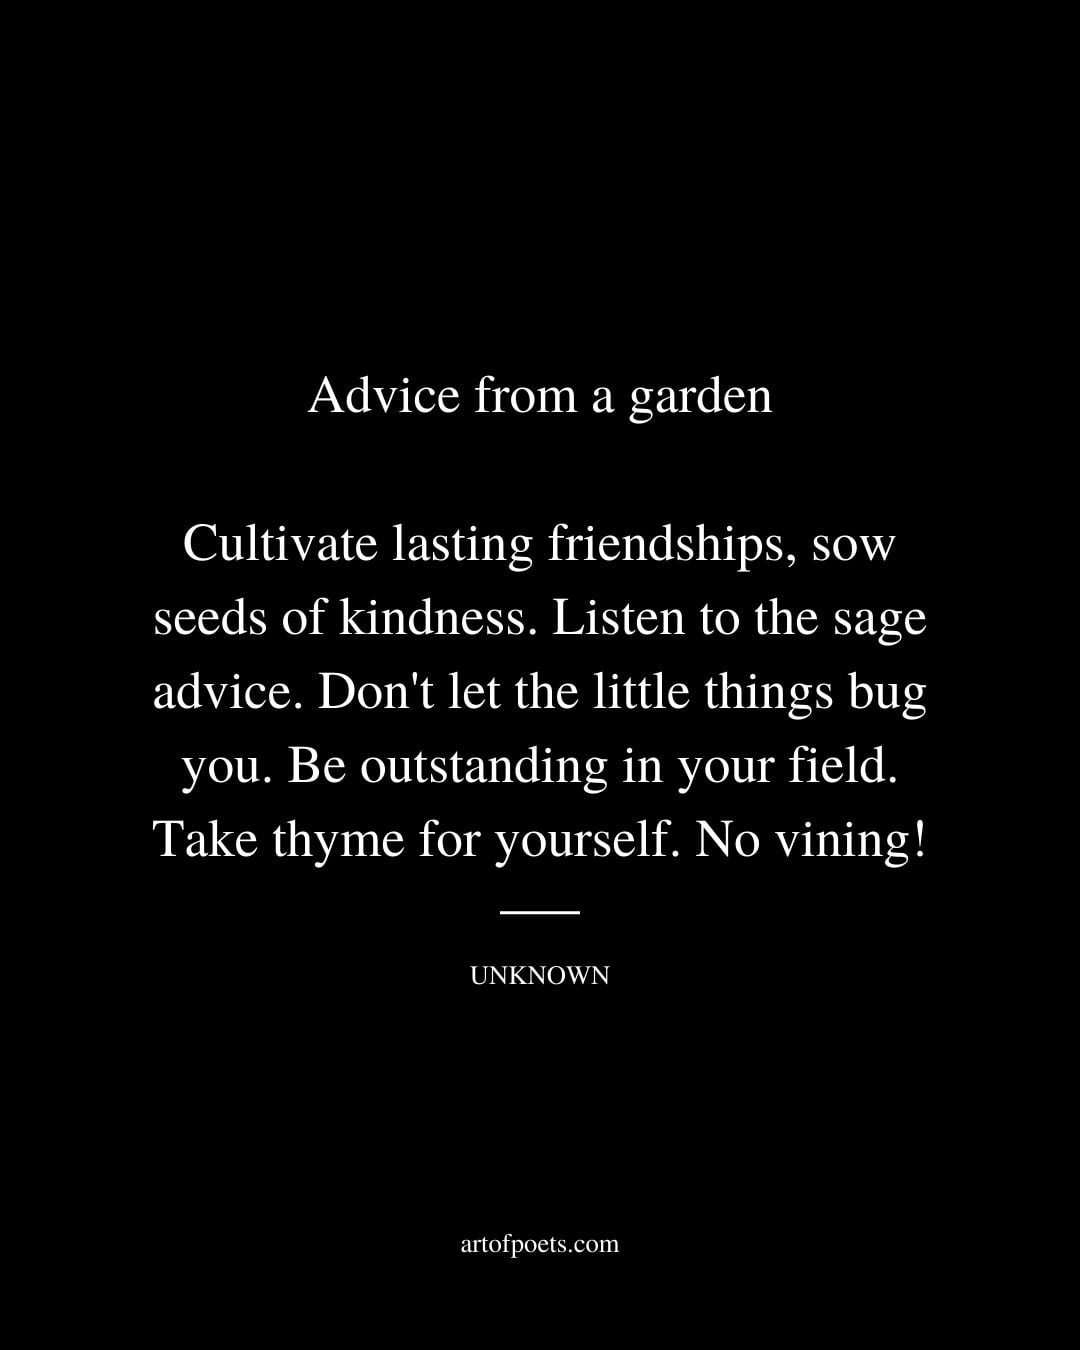 Advice from a garden—Cultivate lasting friendships sow seeds of kindness. Listen to the sage advice 1